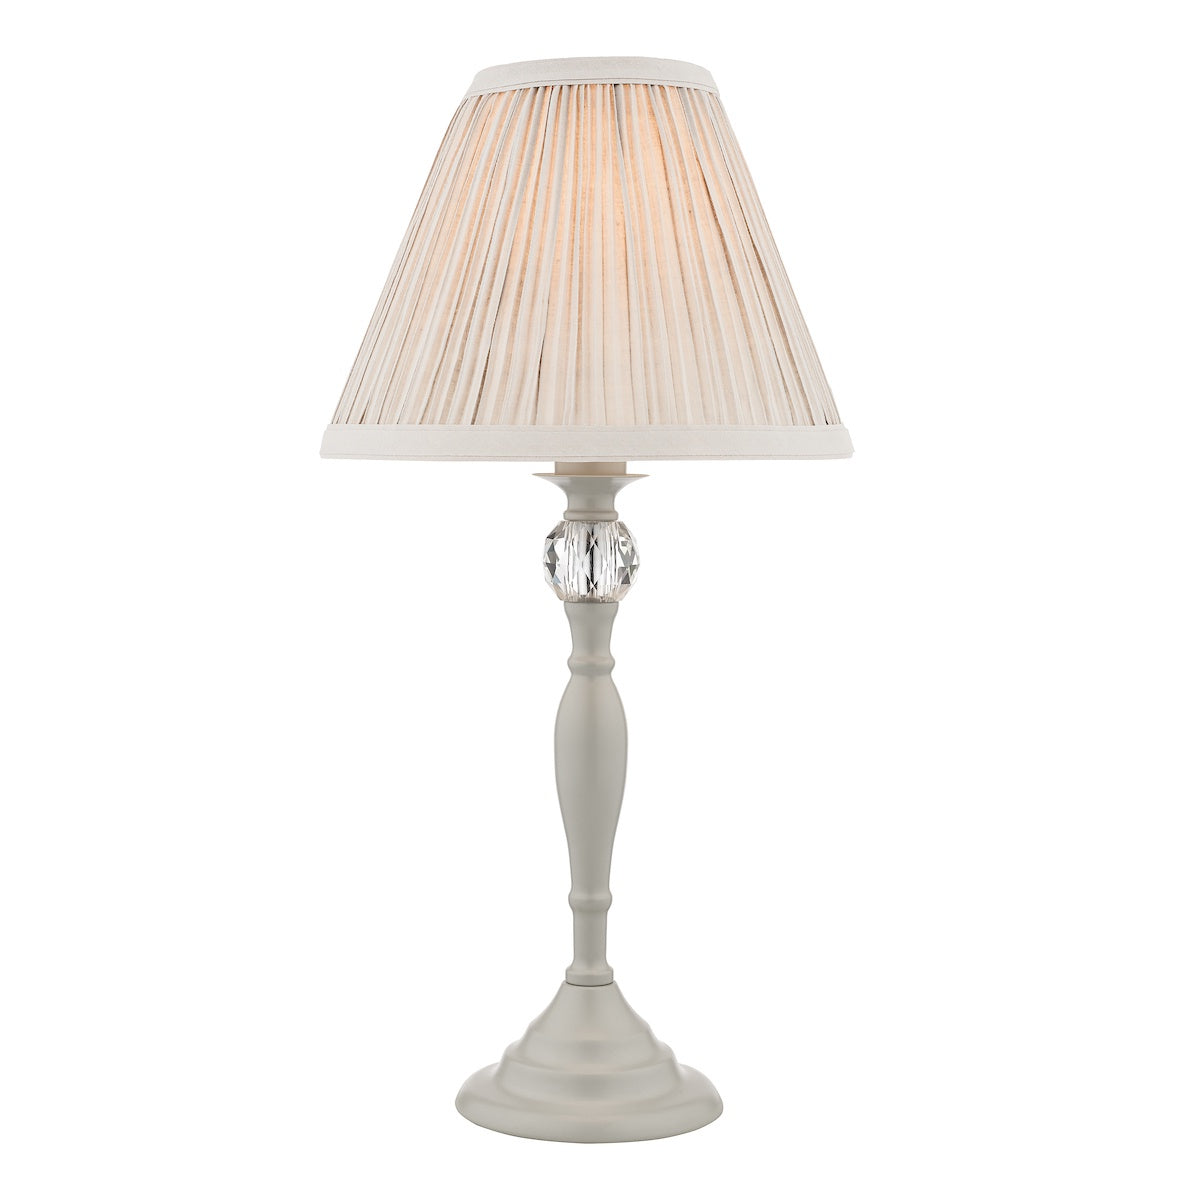 Laura Ashley Ellis Satin-Painted Spindle LA3702783-Q Table Lamp Grey with Ivory Shade